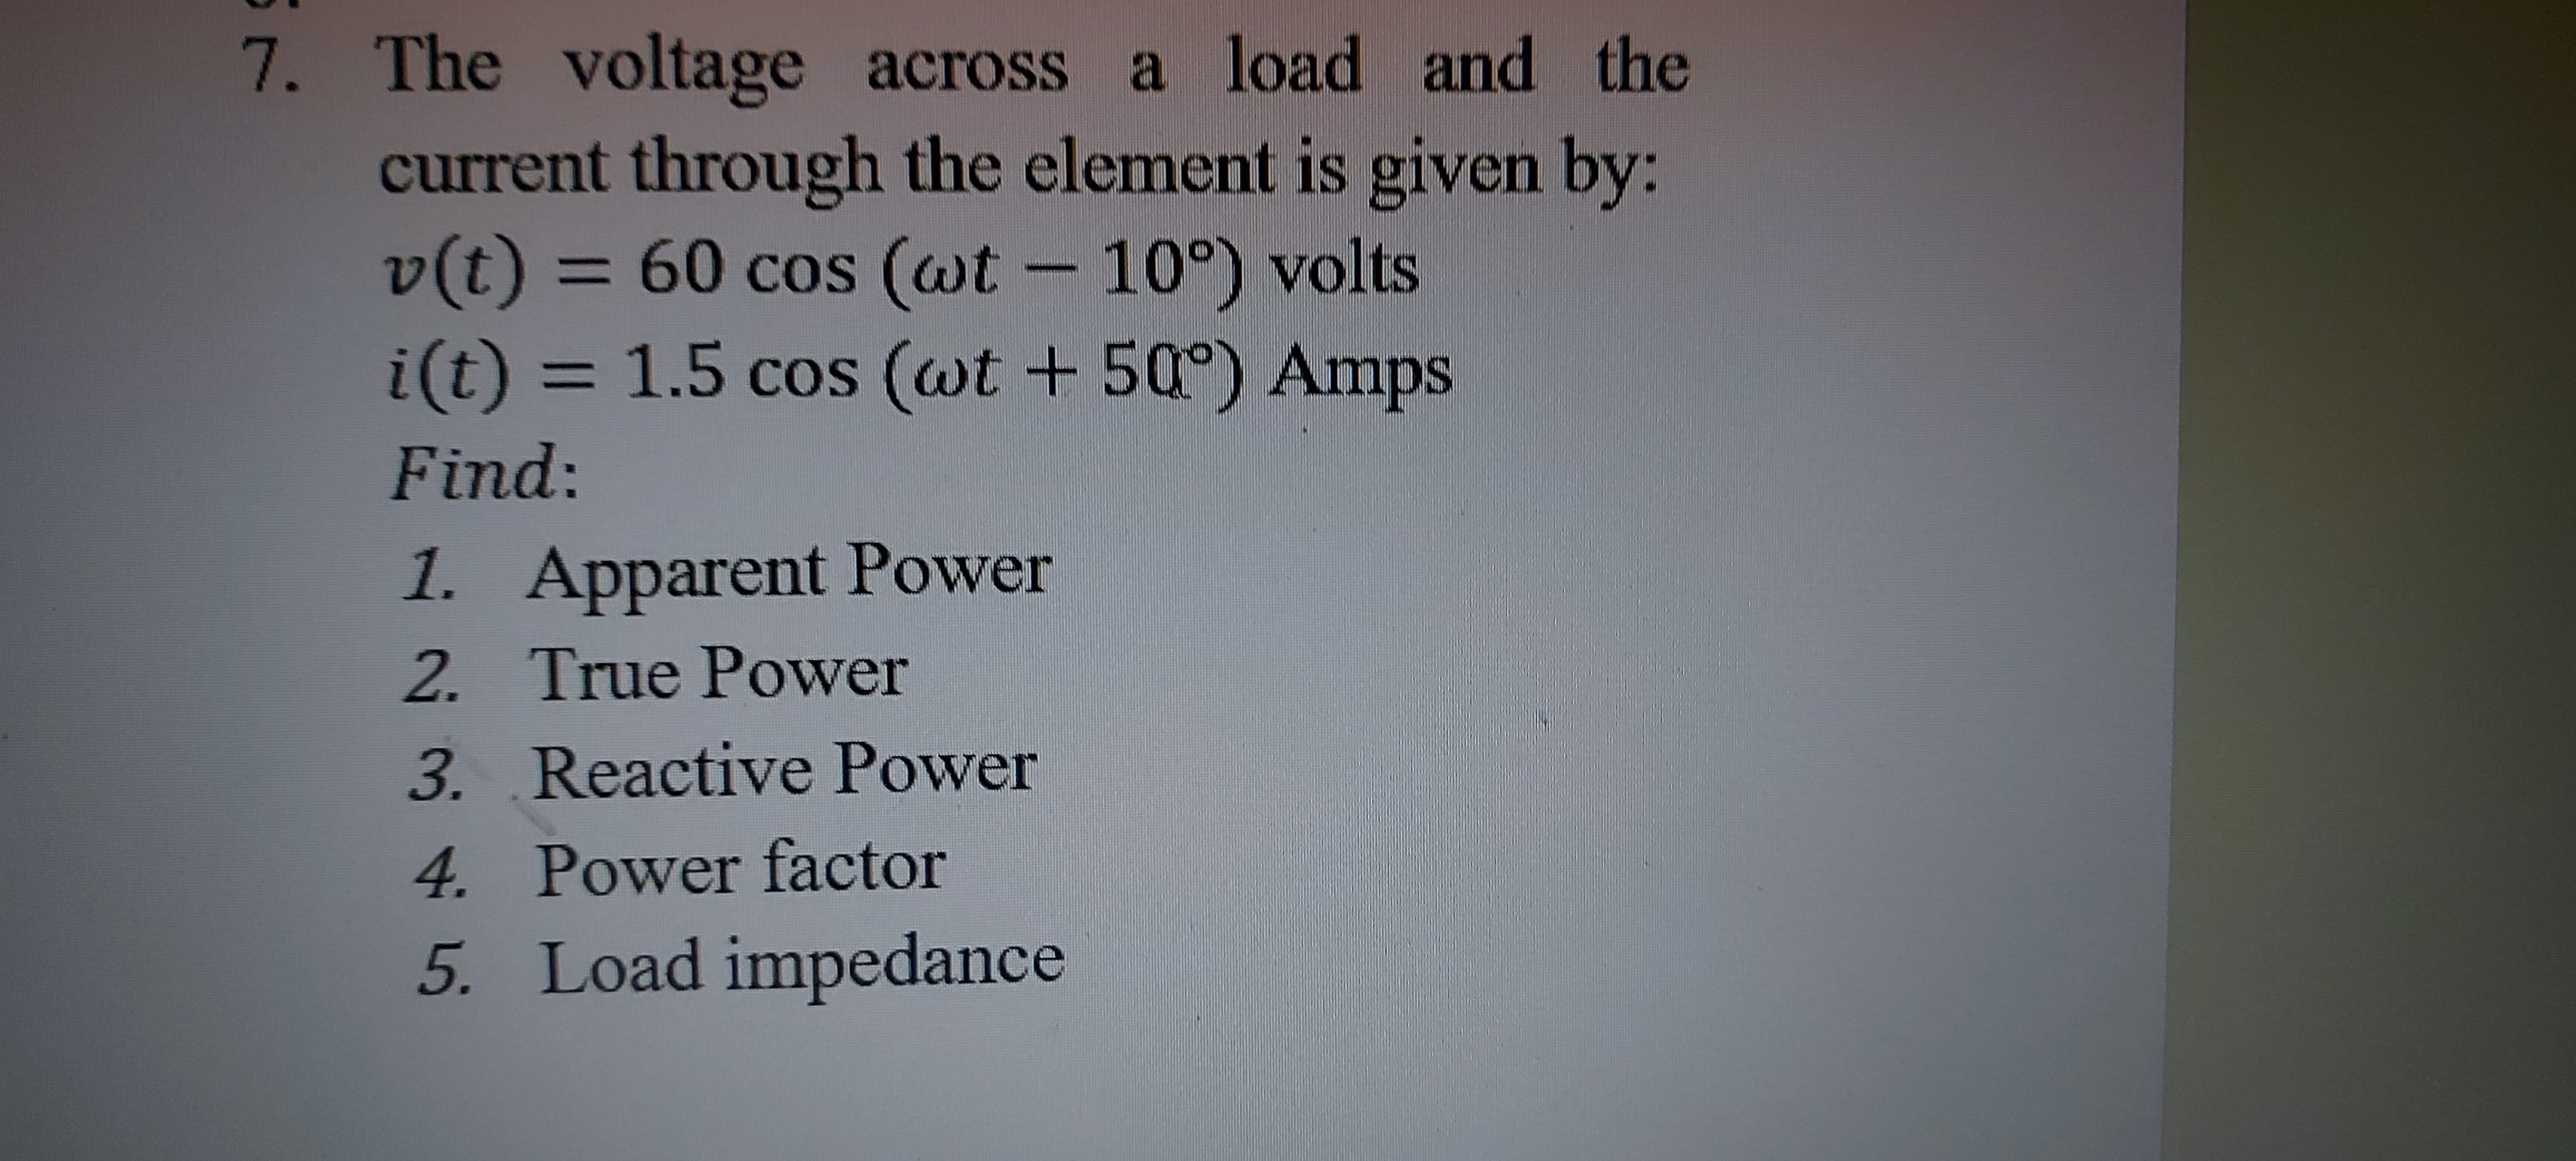 The voltage across a load and the
current through the element is given by:
v(t) = 60 cos (wt - 10°) volts
i(t) 3D 1.5 cos (wt + 50°) Amps
%3D
Find:
1. Apparent Power
2. True Power
3. Reactive Power
